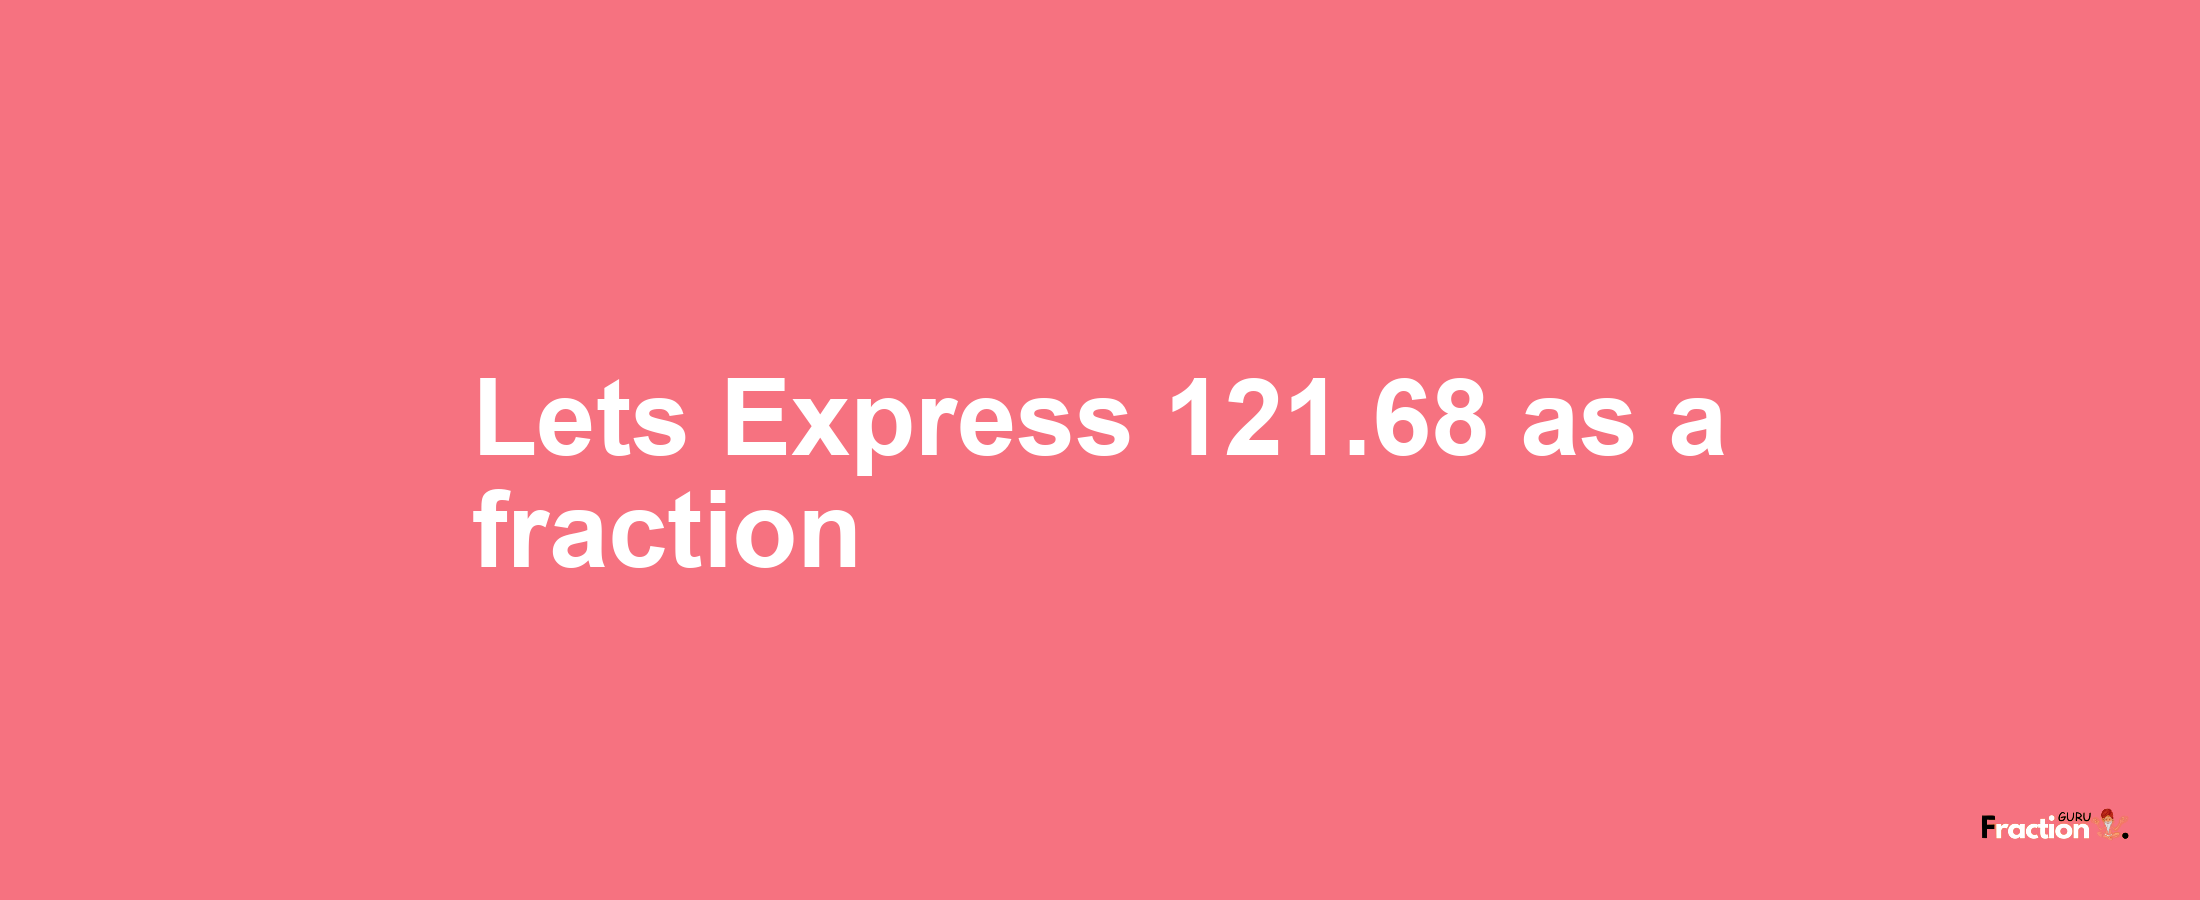 Lets Express 121.68 as afraction